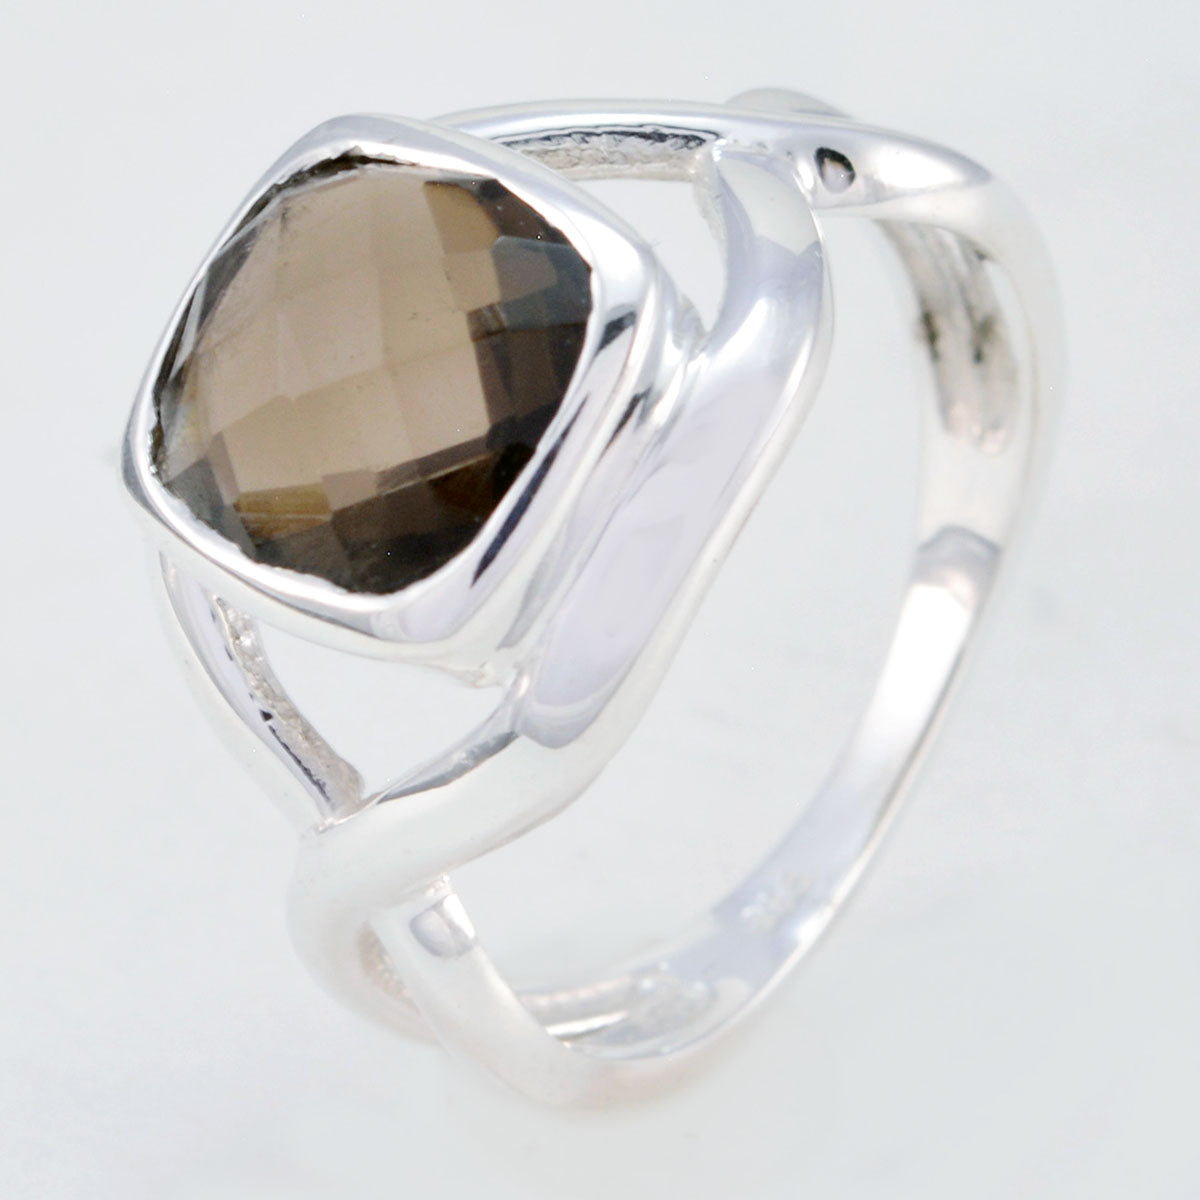 Enticing Gemstones Smoky Quartz Sterling Silver Rings Jewelry Stands